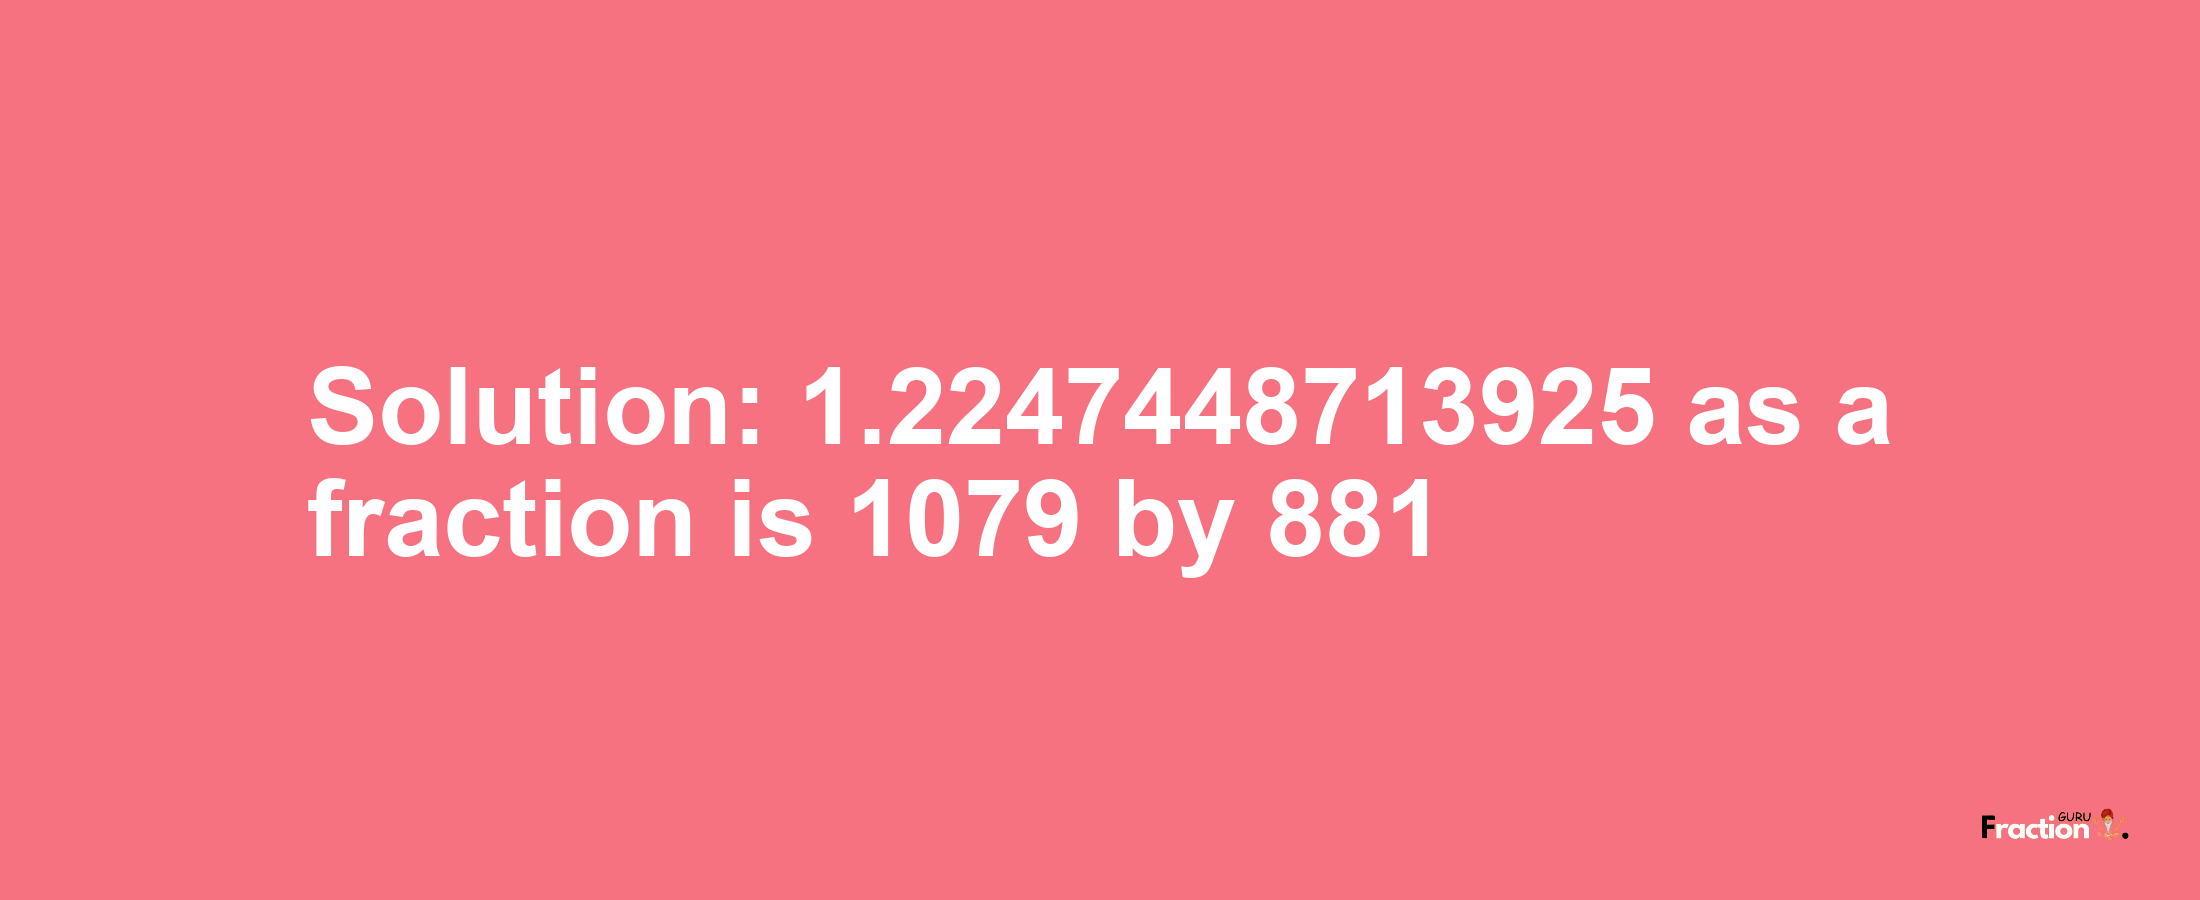 Solution:1.2247448713925 as a fraction is 1079/881